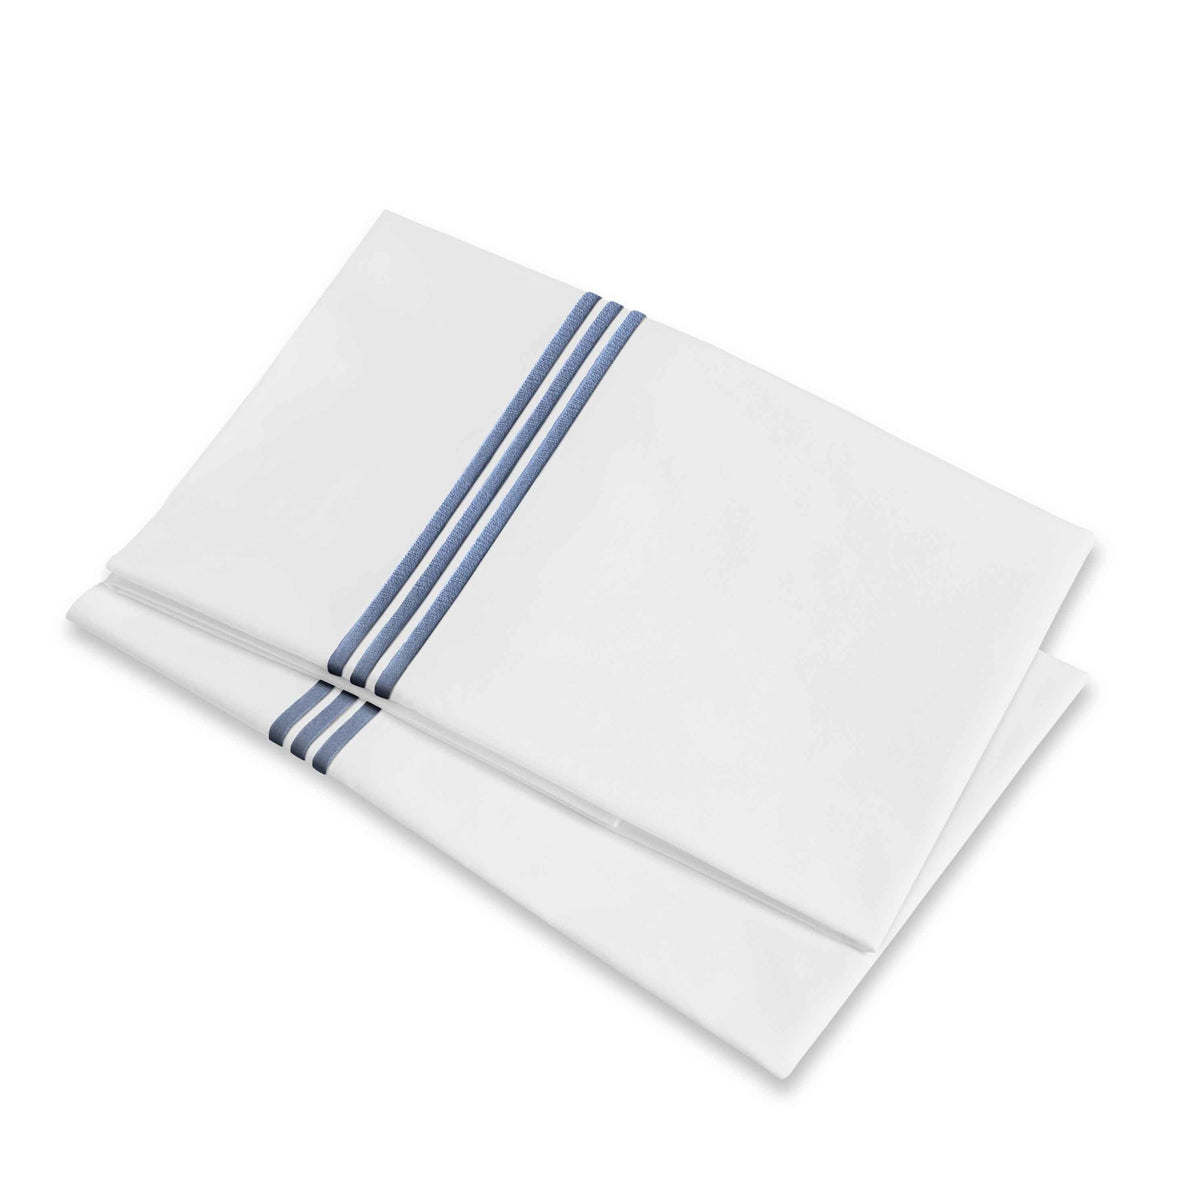 Folded Pillowcases of Signoria Platinum Percale Bedding in White/Airforce Blue Color